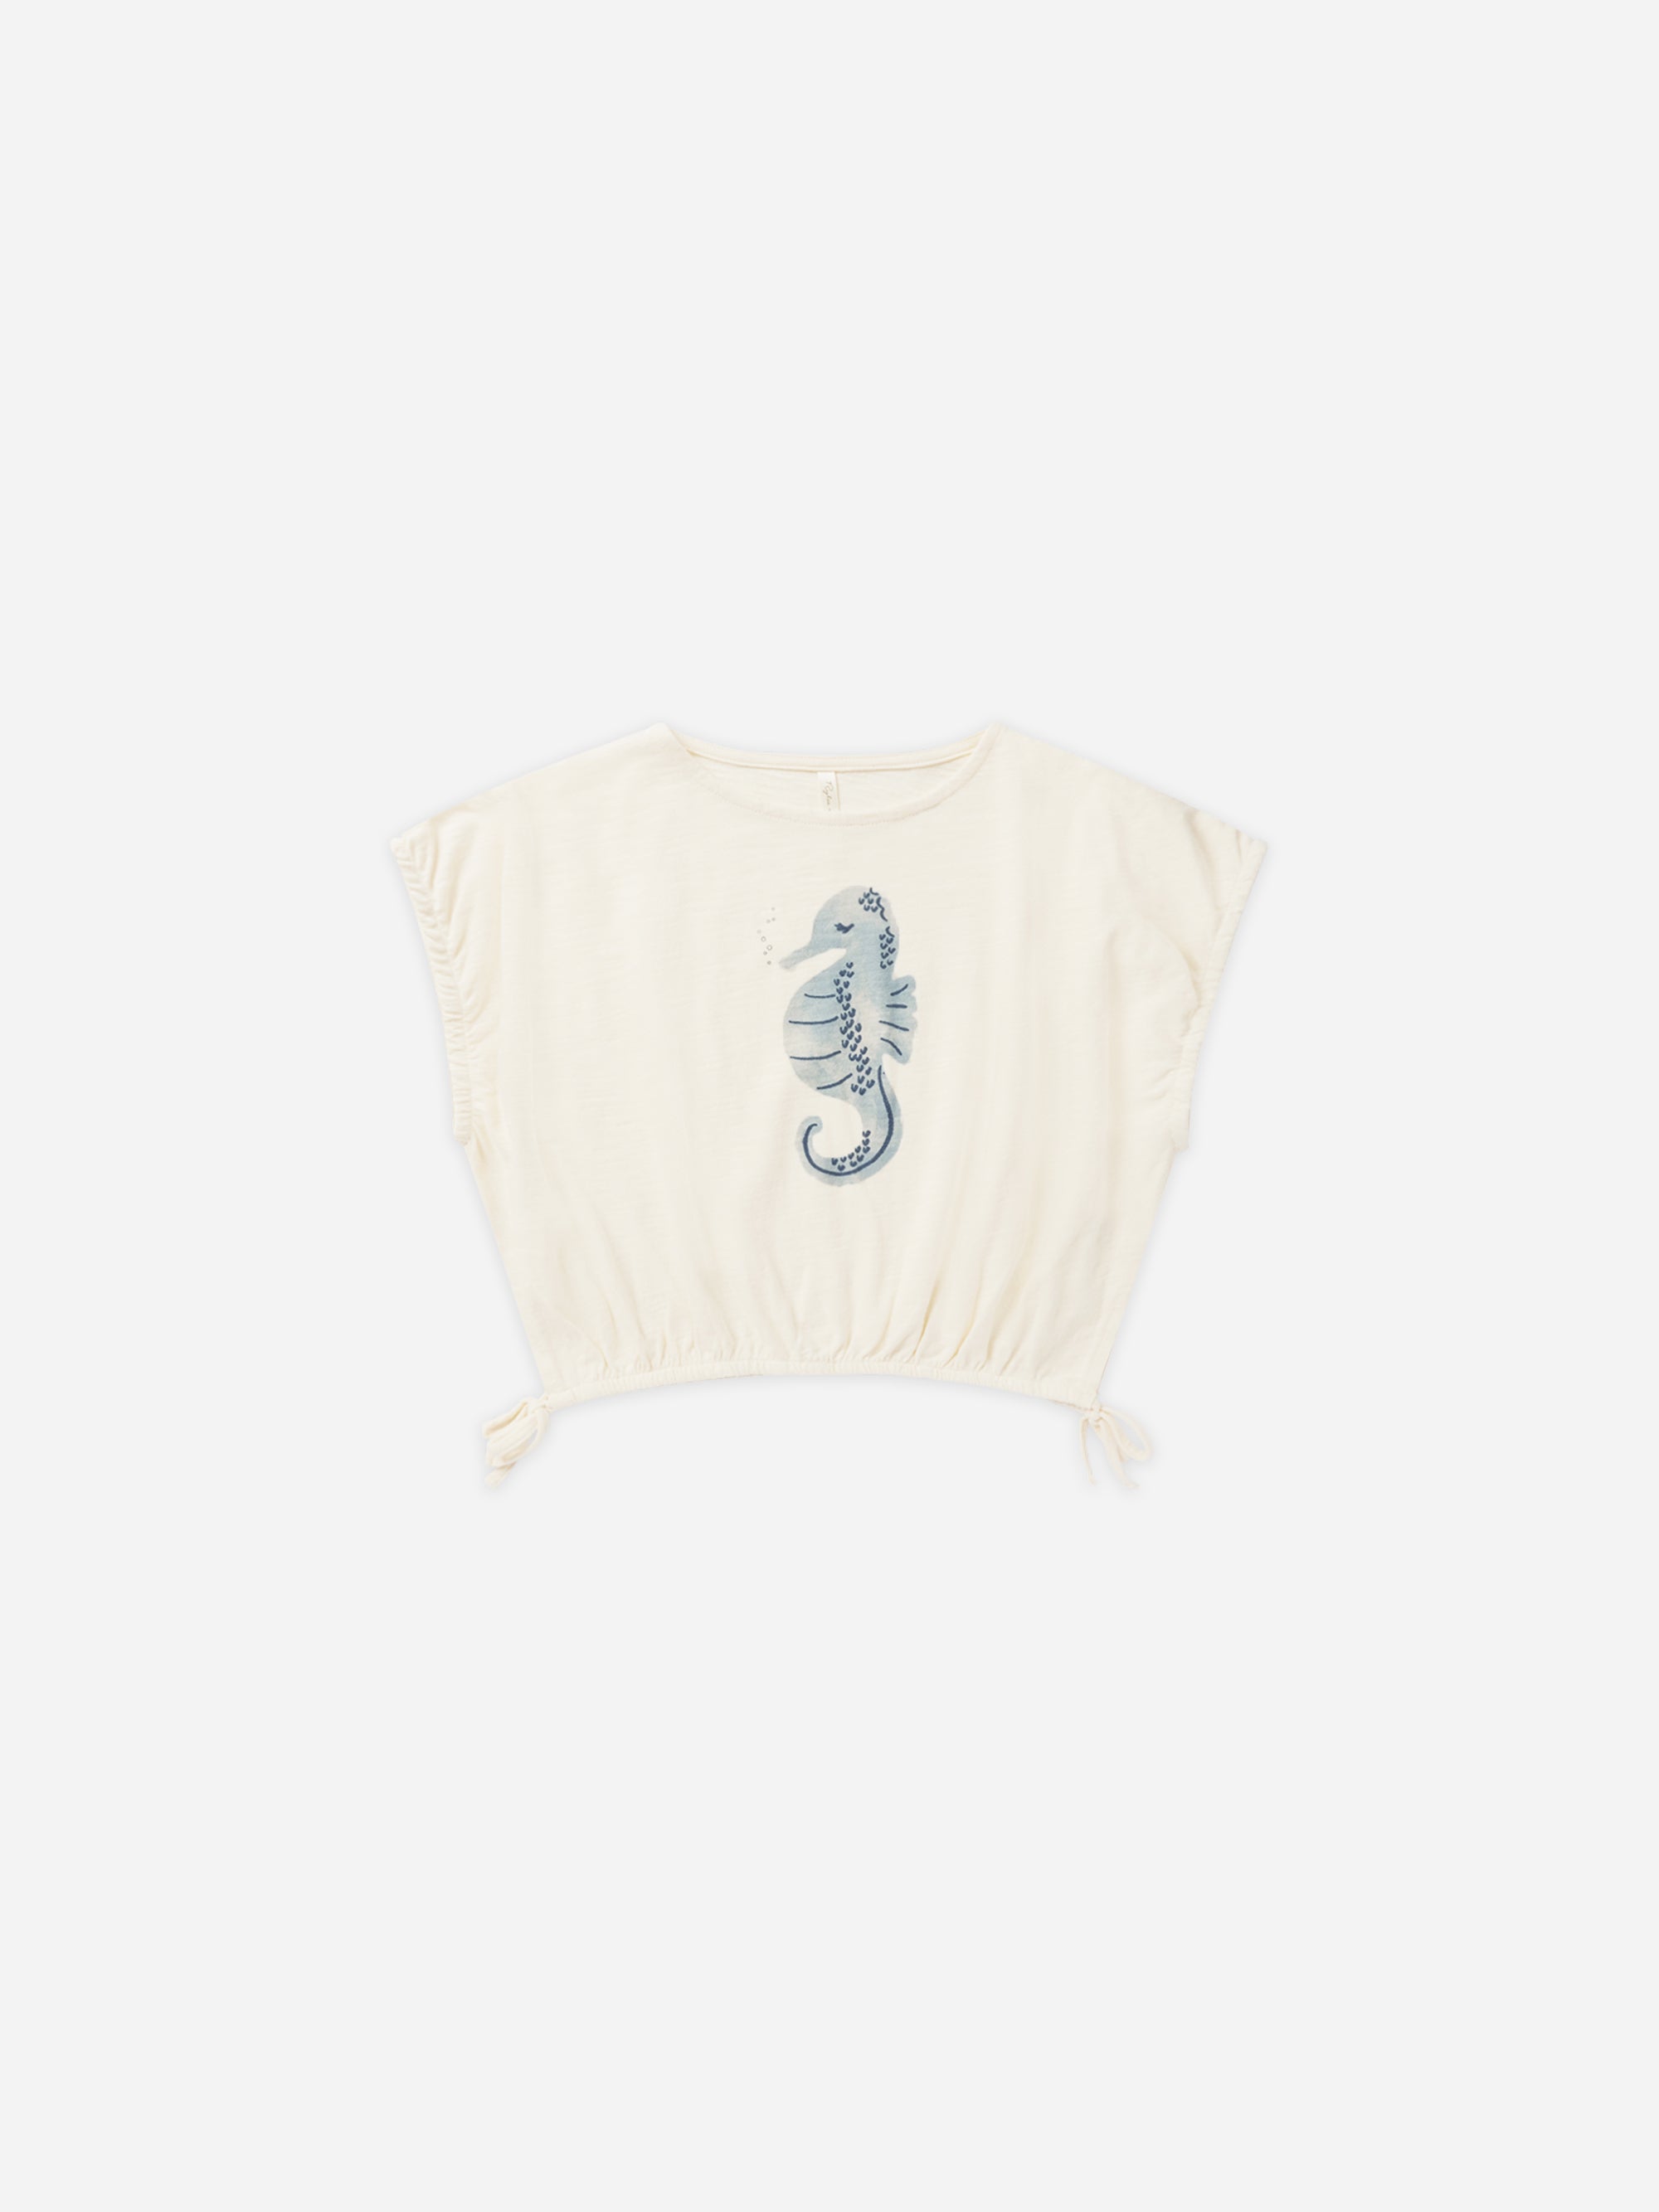 Cropped Cinched Tee || Seahorse - Rylee + Cru | Kids Clothes | Trendy Baby Clothes | Modern Infant Outfits |